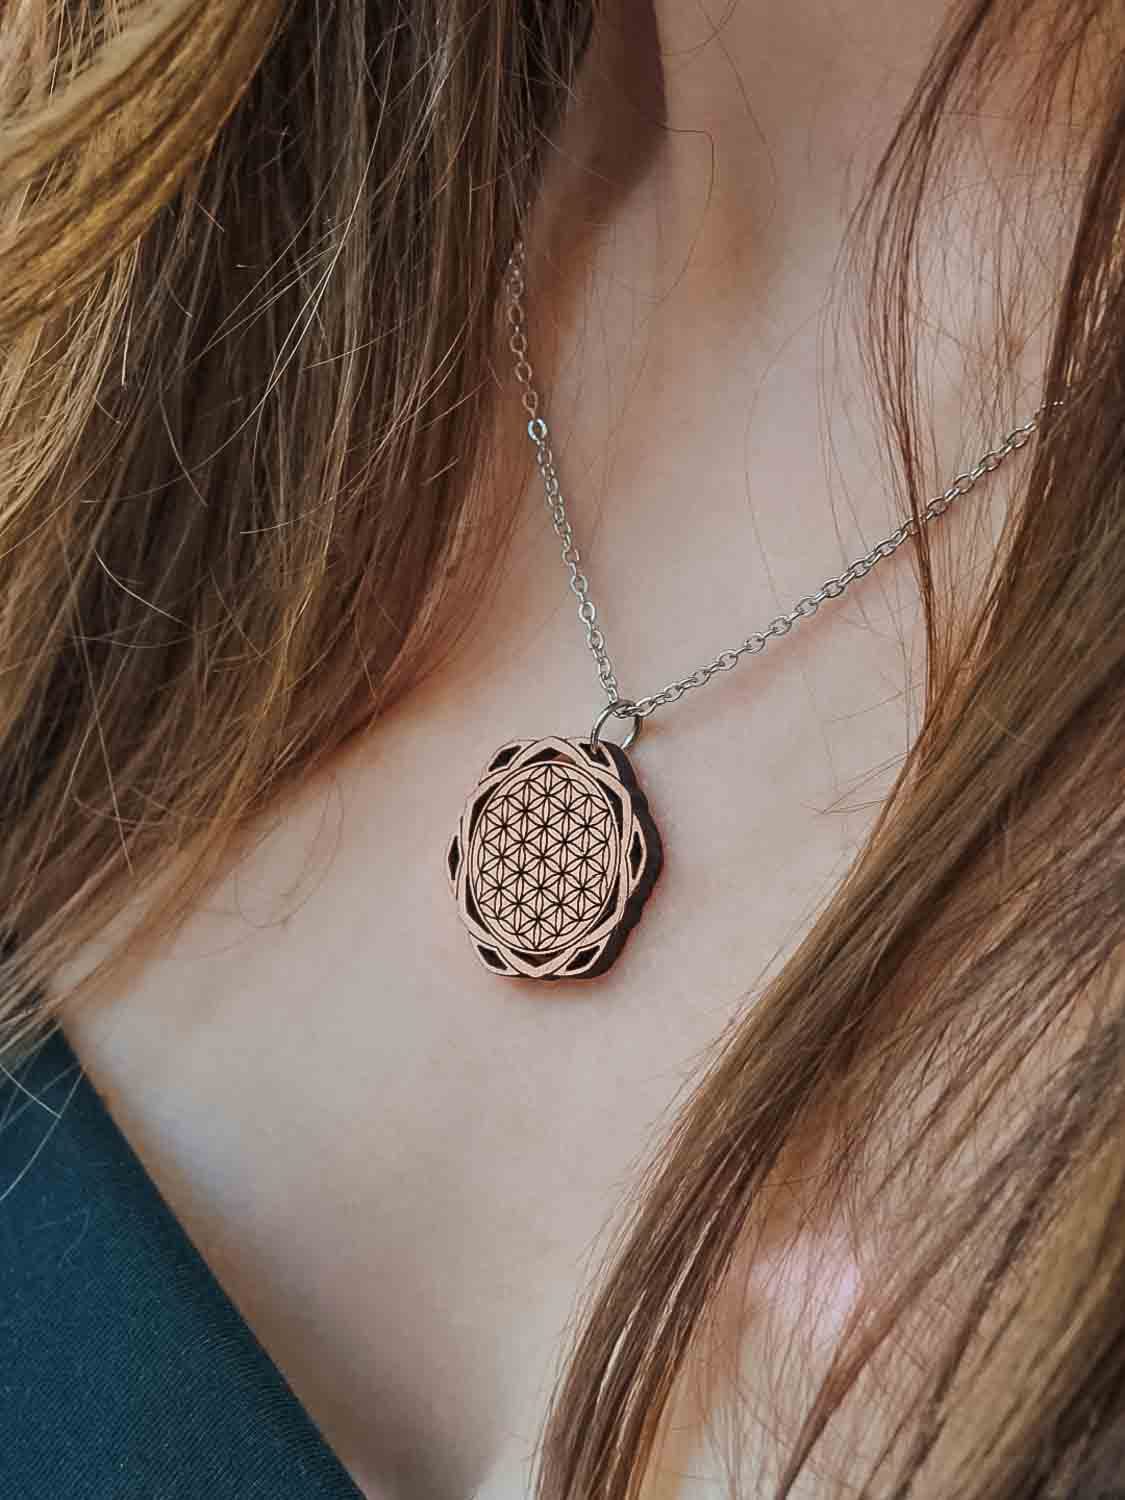 Wooden necklace with the symbol of the flower of life